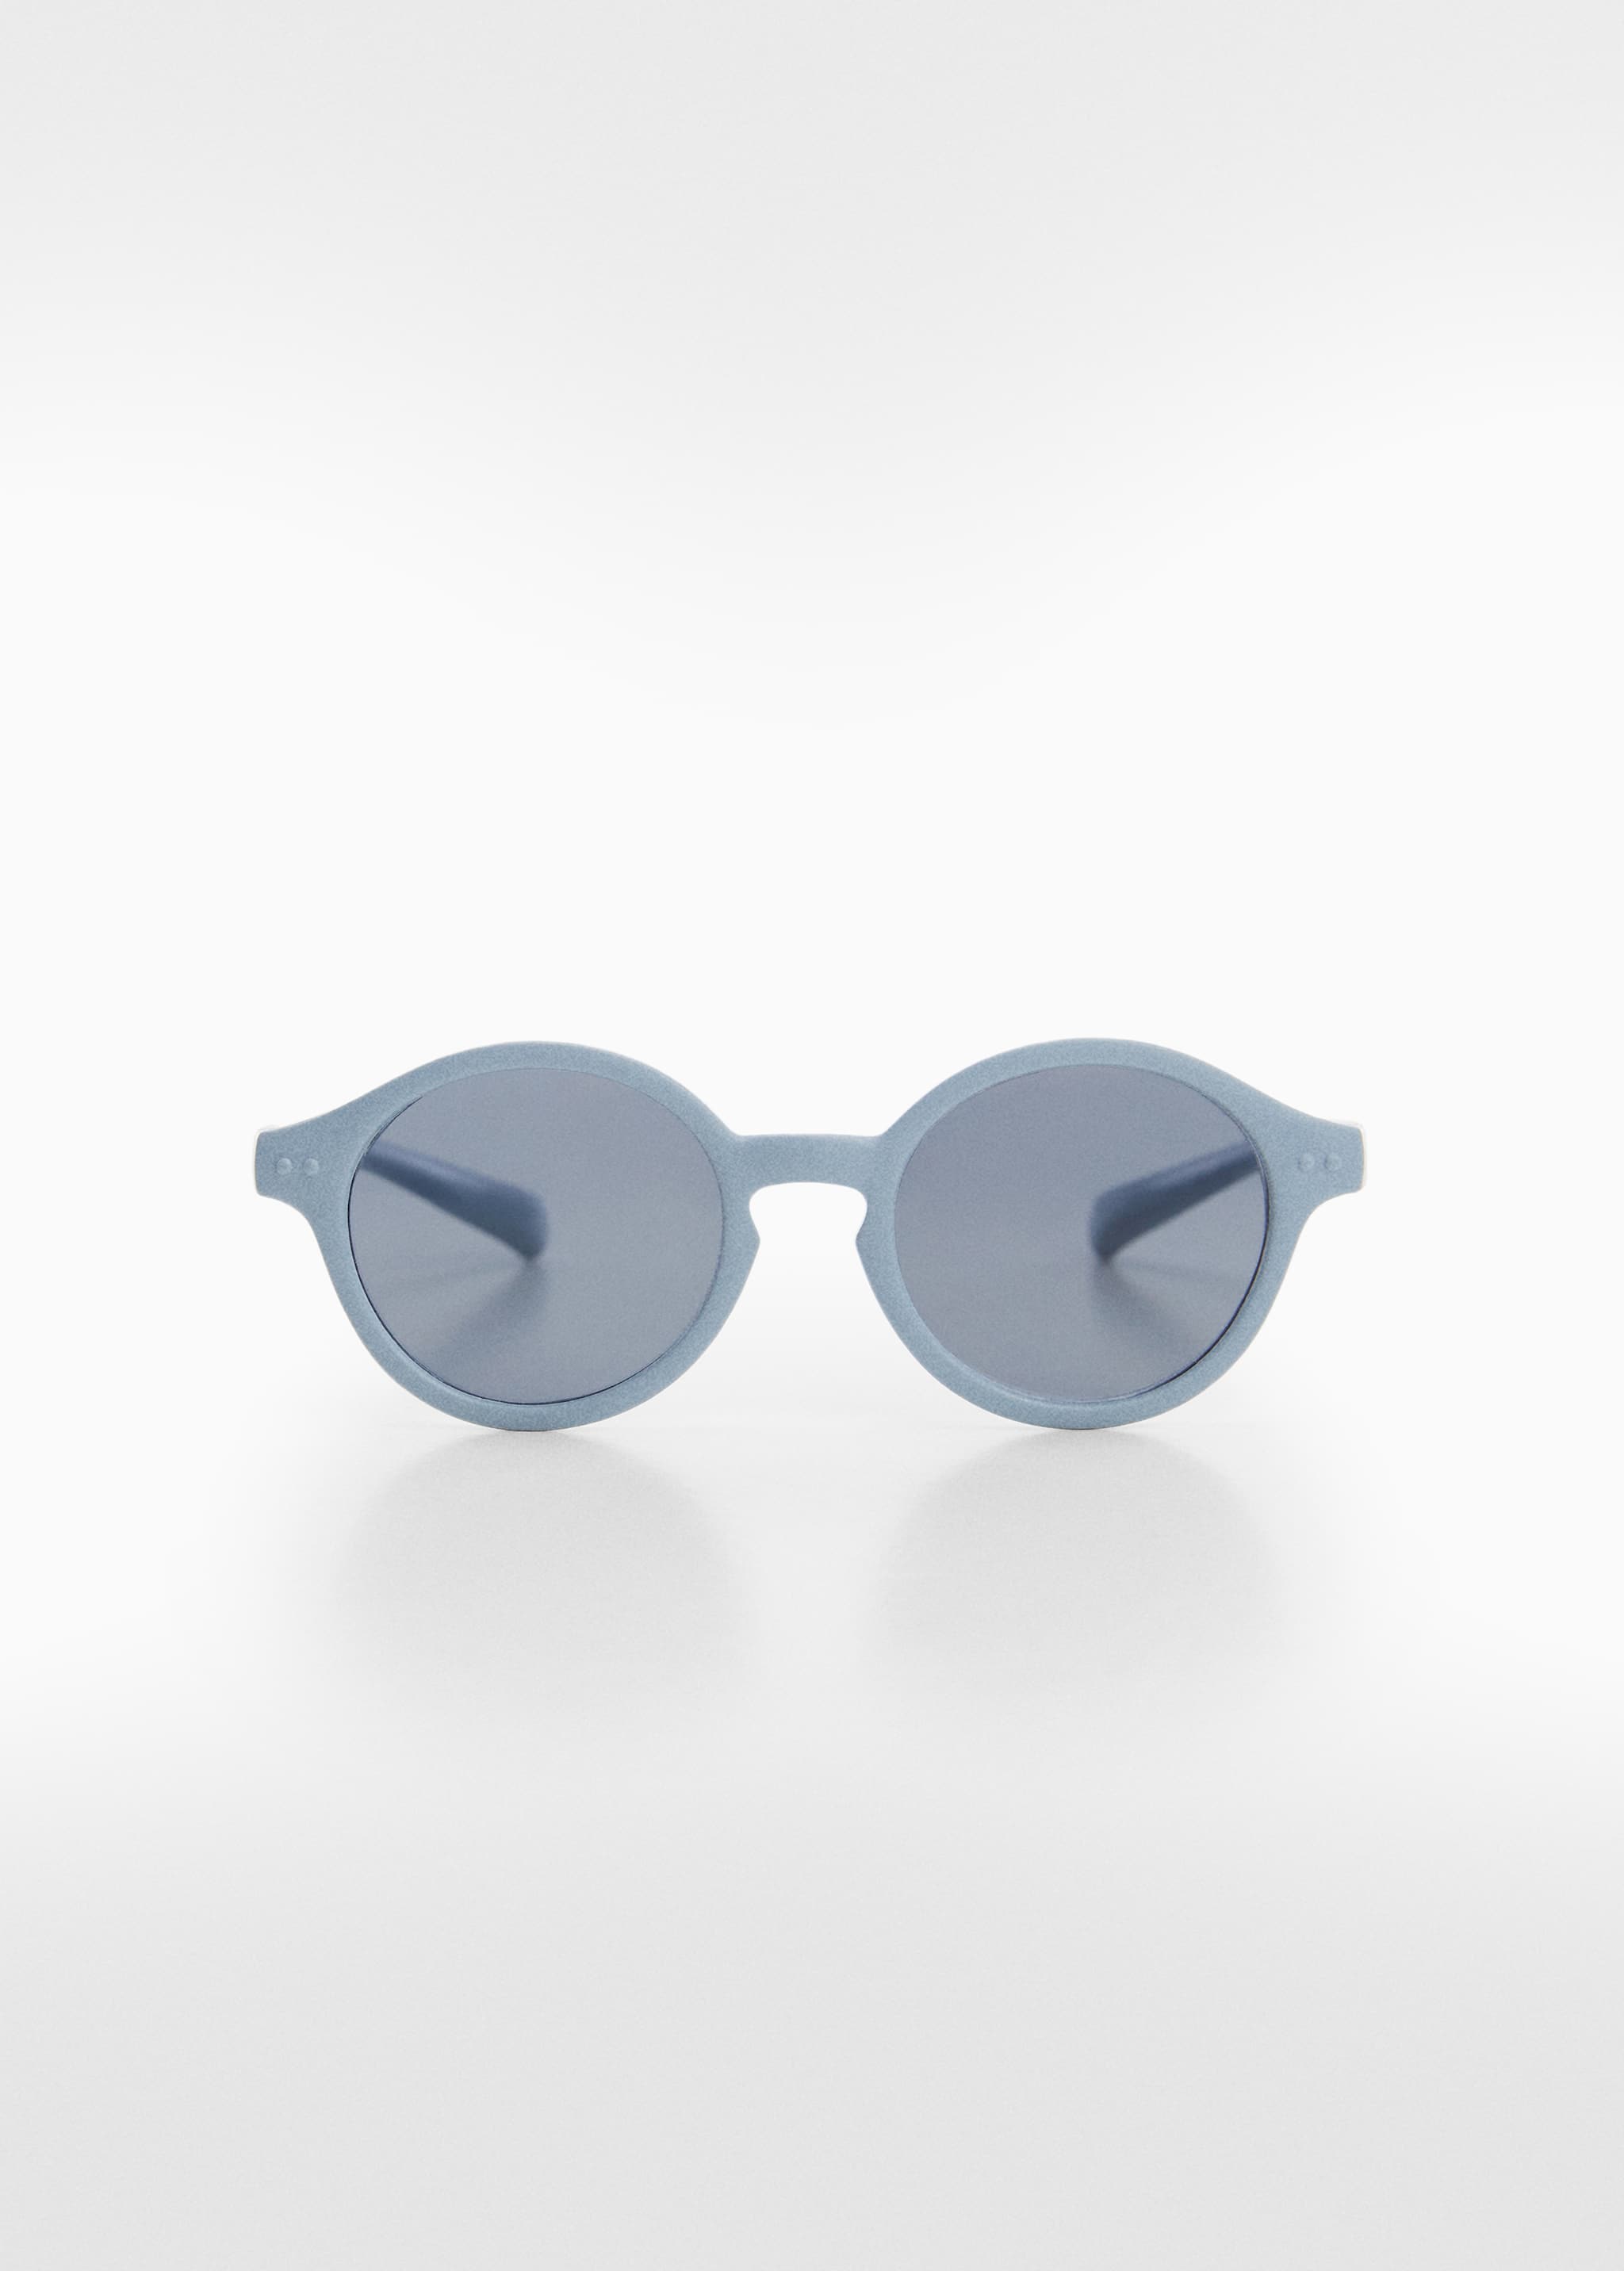 Rounded sunglasses - Article without model